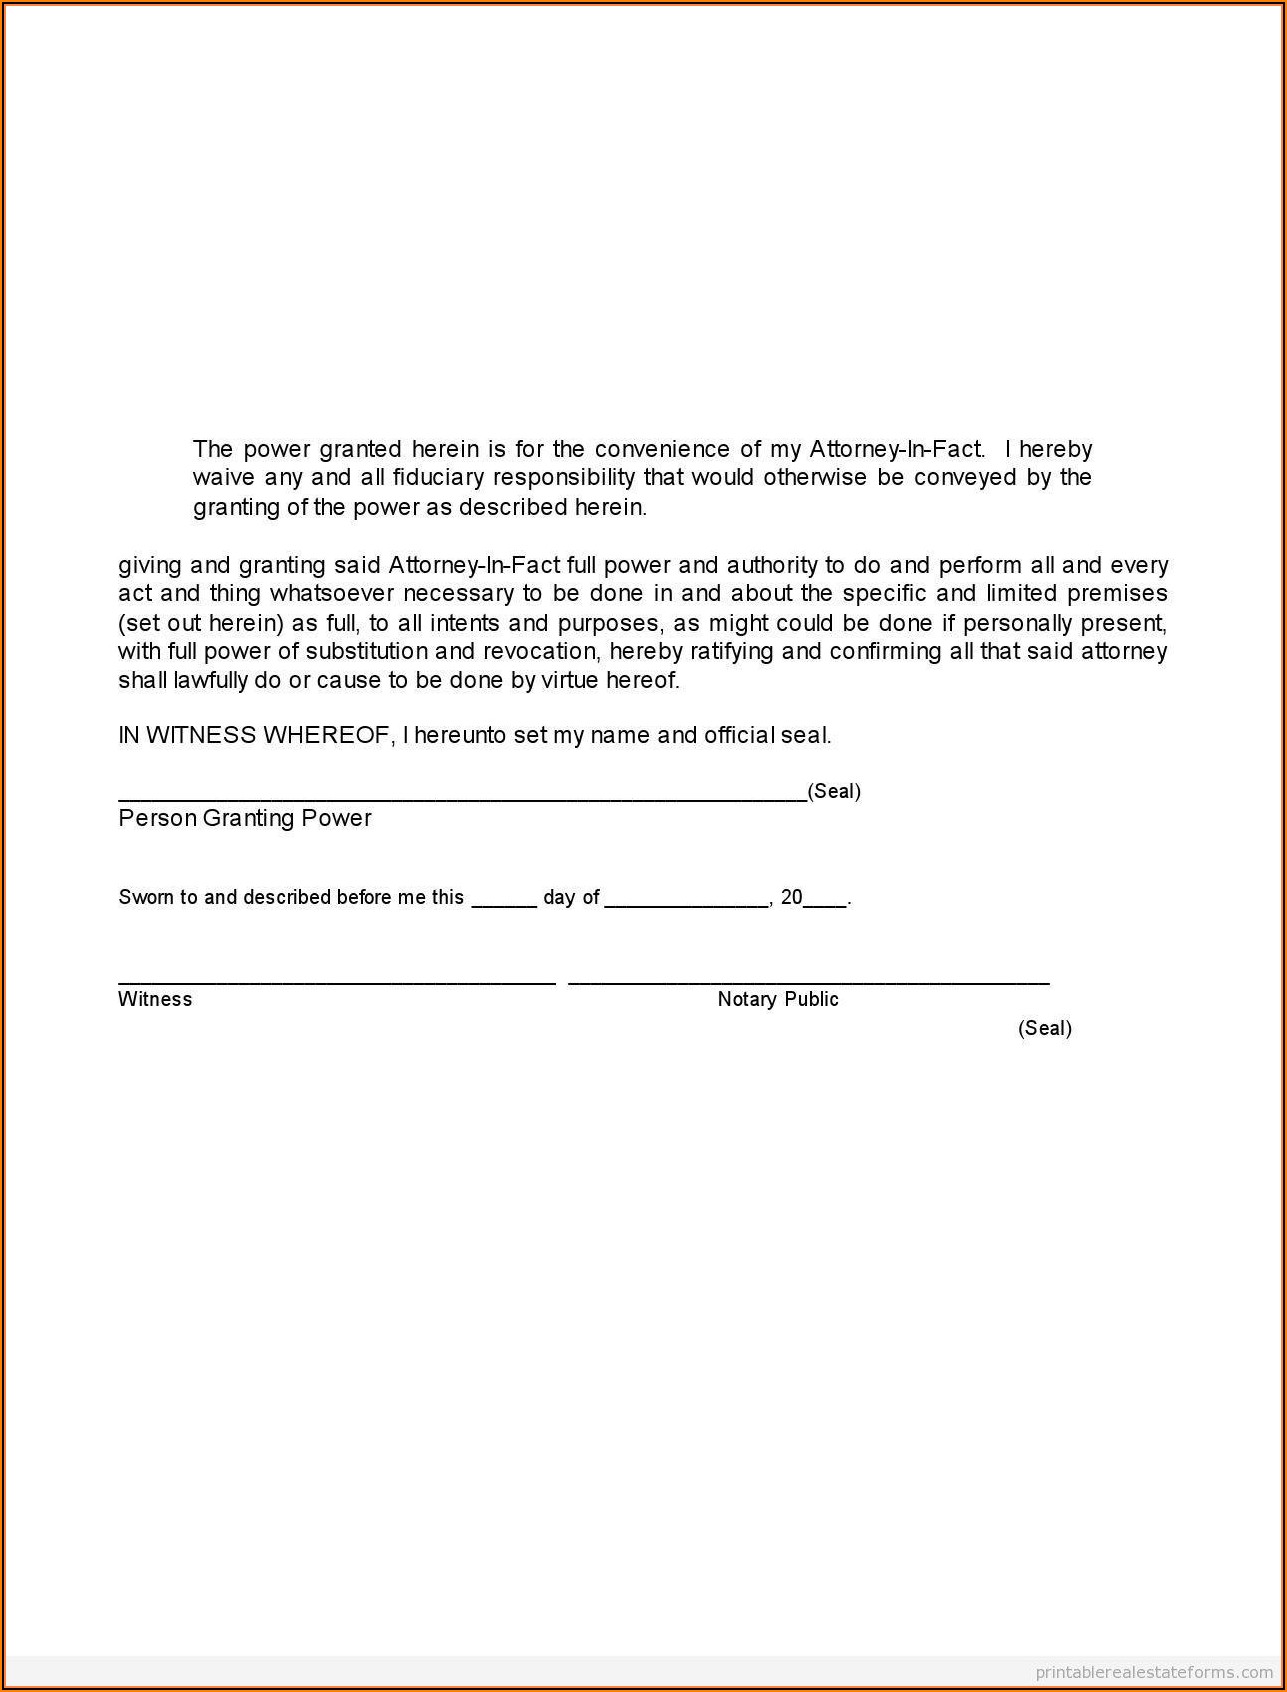 Sample Form Of Power Of Attorney